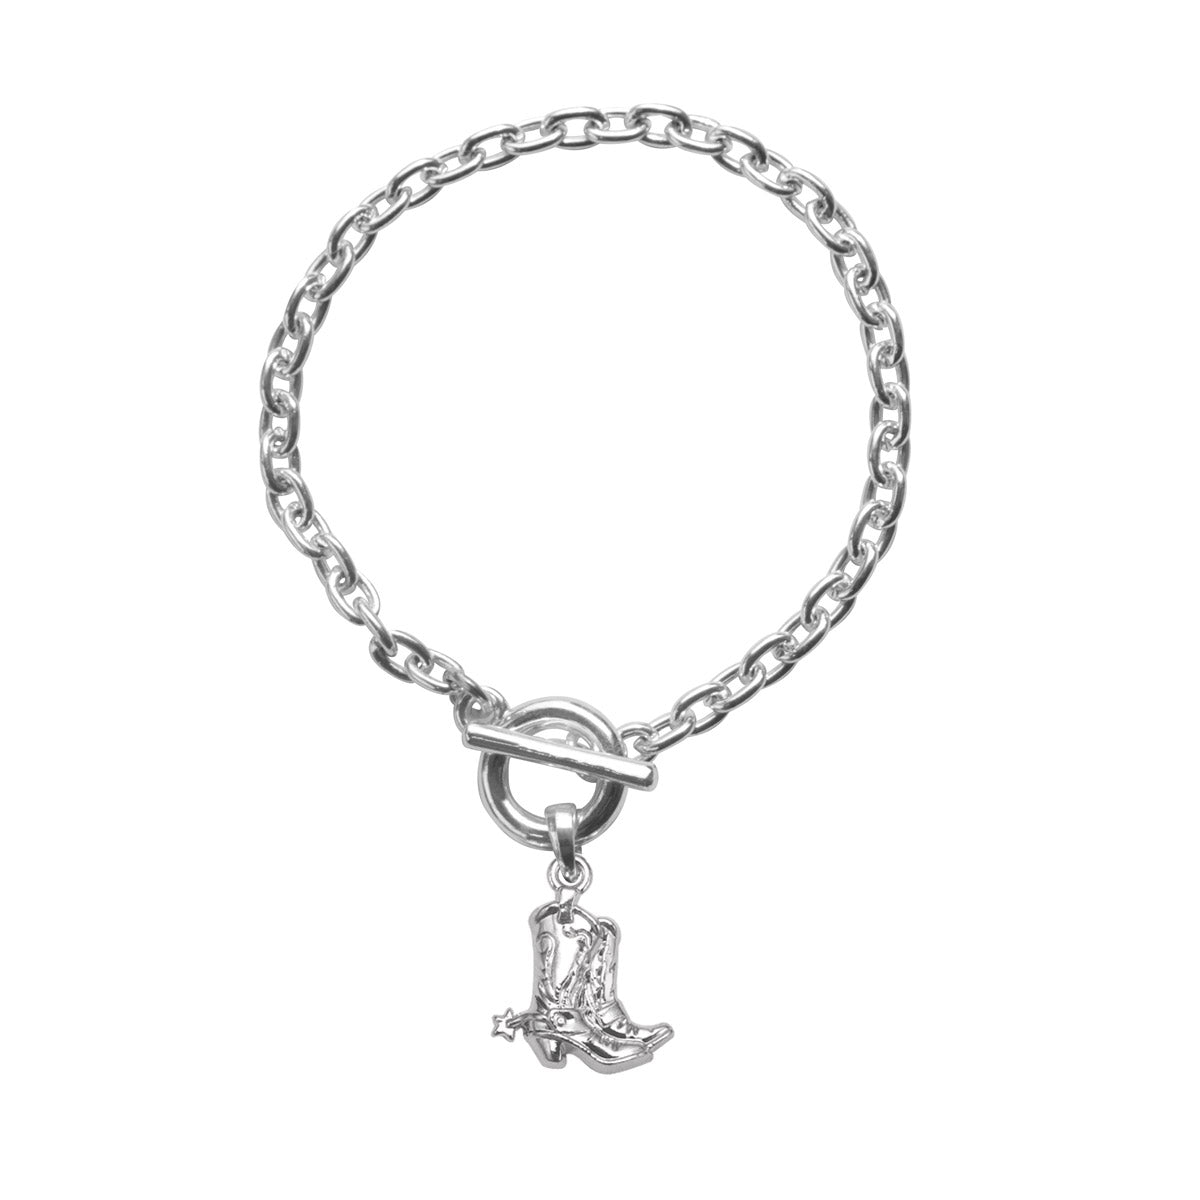 Silver Petite Cowgirl Boot Charm Toggle Bracelet